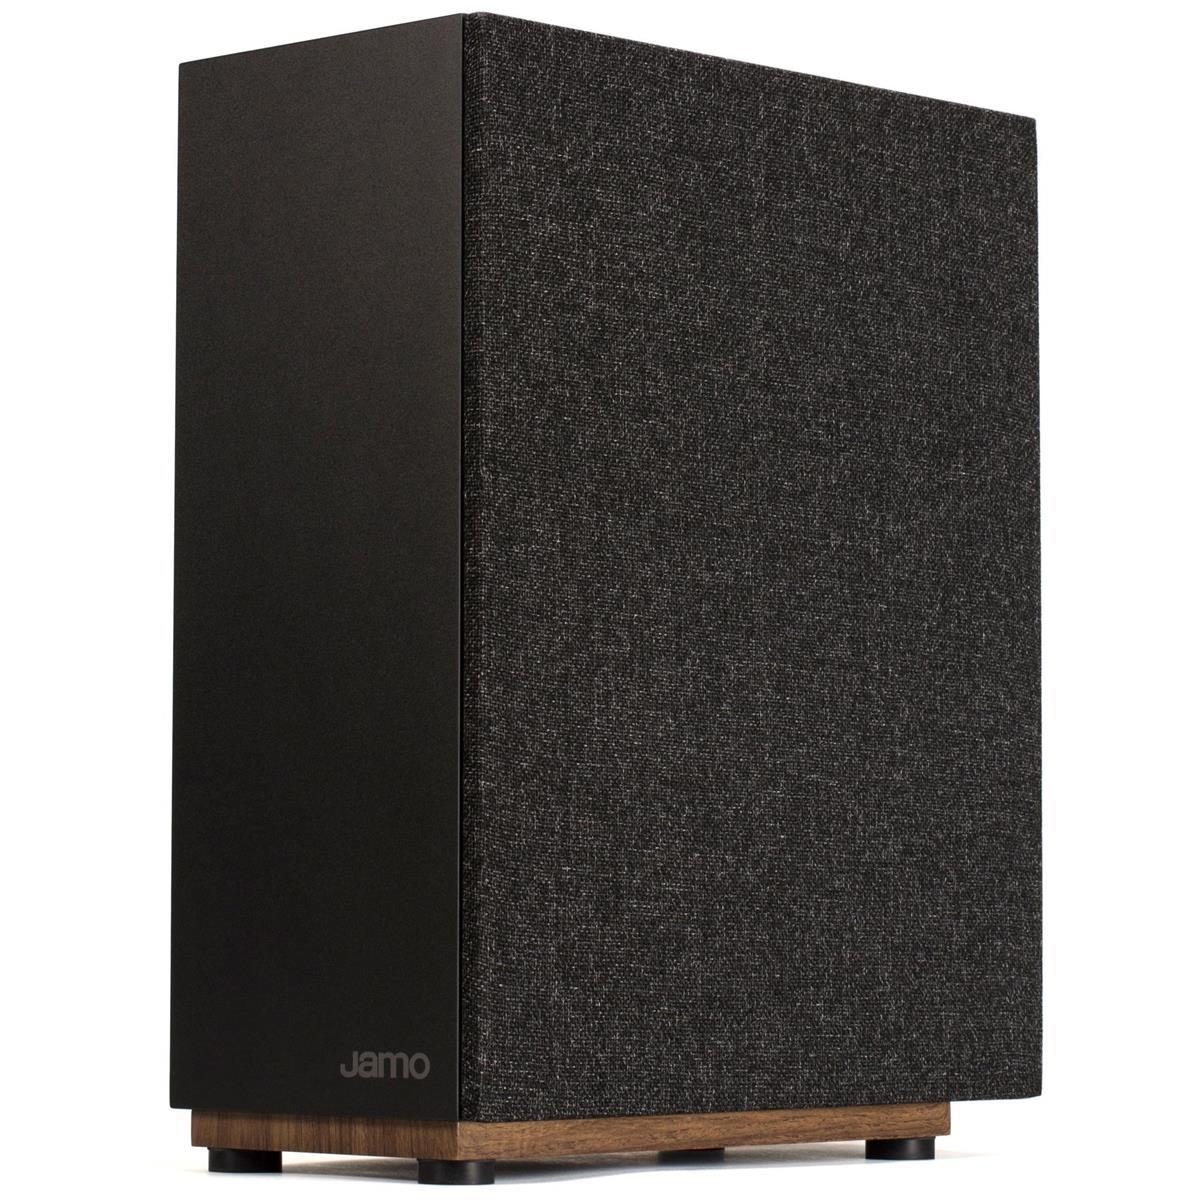 Jamo S 808 100W 8in Subwoofer for $89 Shipped